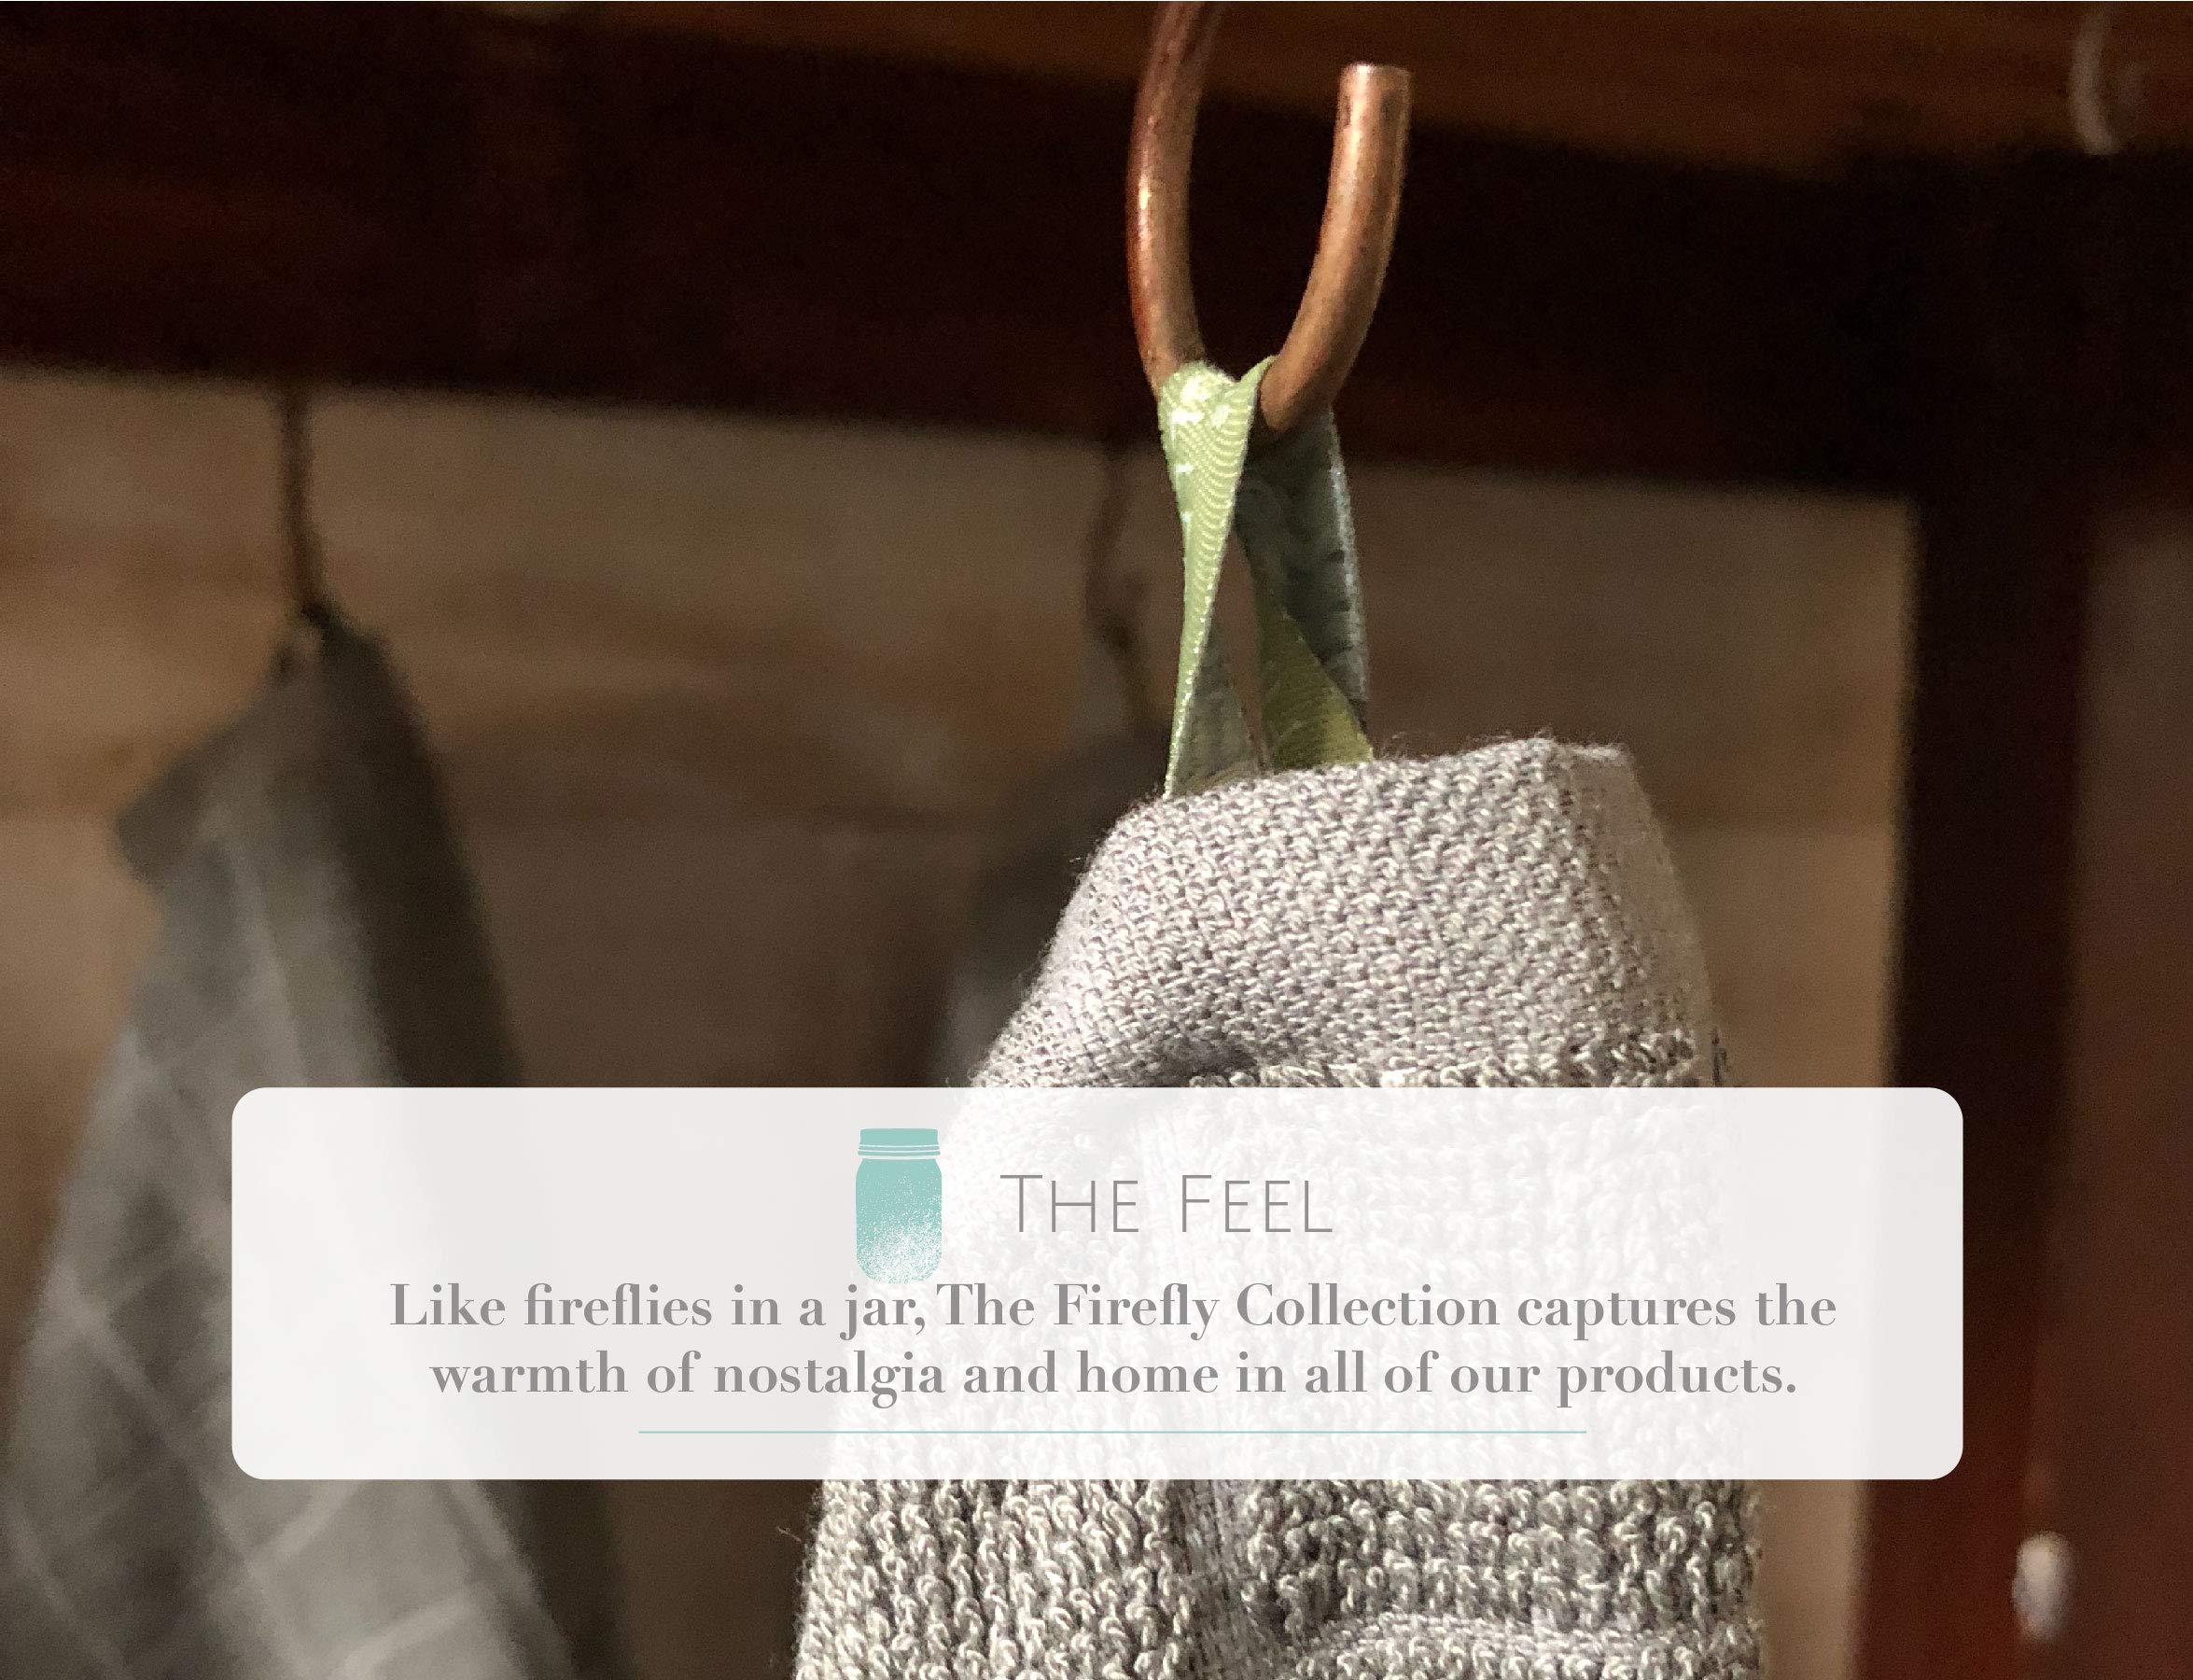 THE FIREFLY COLLECTION Kitchen Towel Set, 4pk - Lightweight, Ultra Absorbent Kitchen Towels Perfect for Your Wiping, Cleaning & Drying Needs with Soft, Sustainable Fibers - Granite Grey